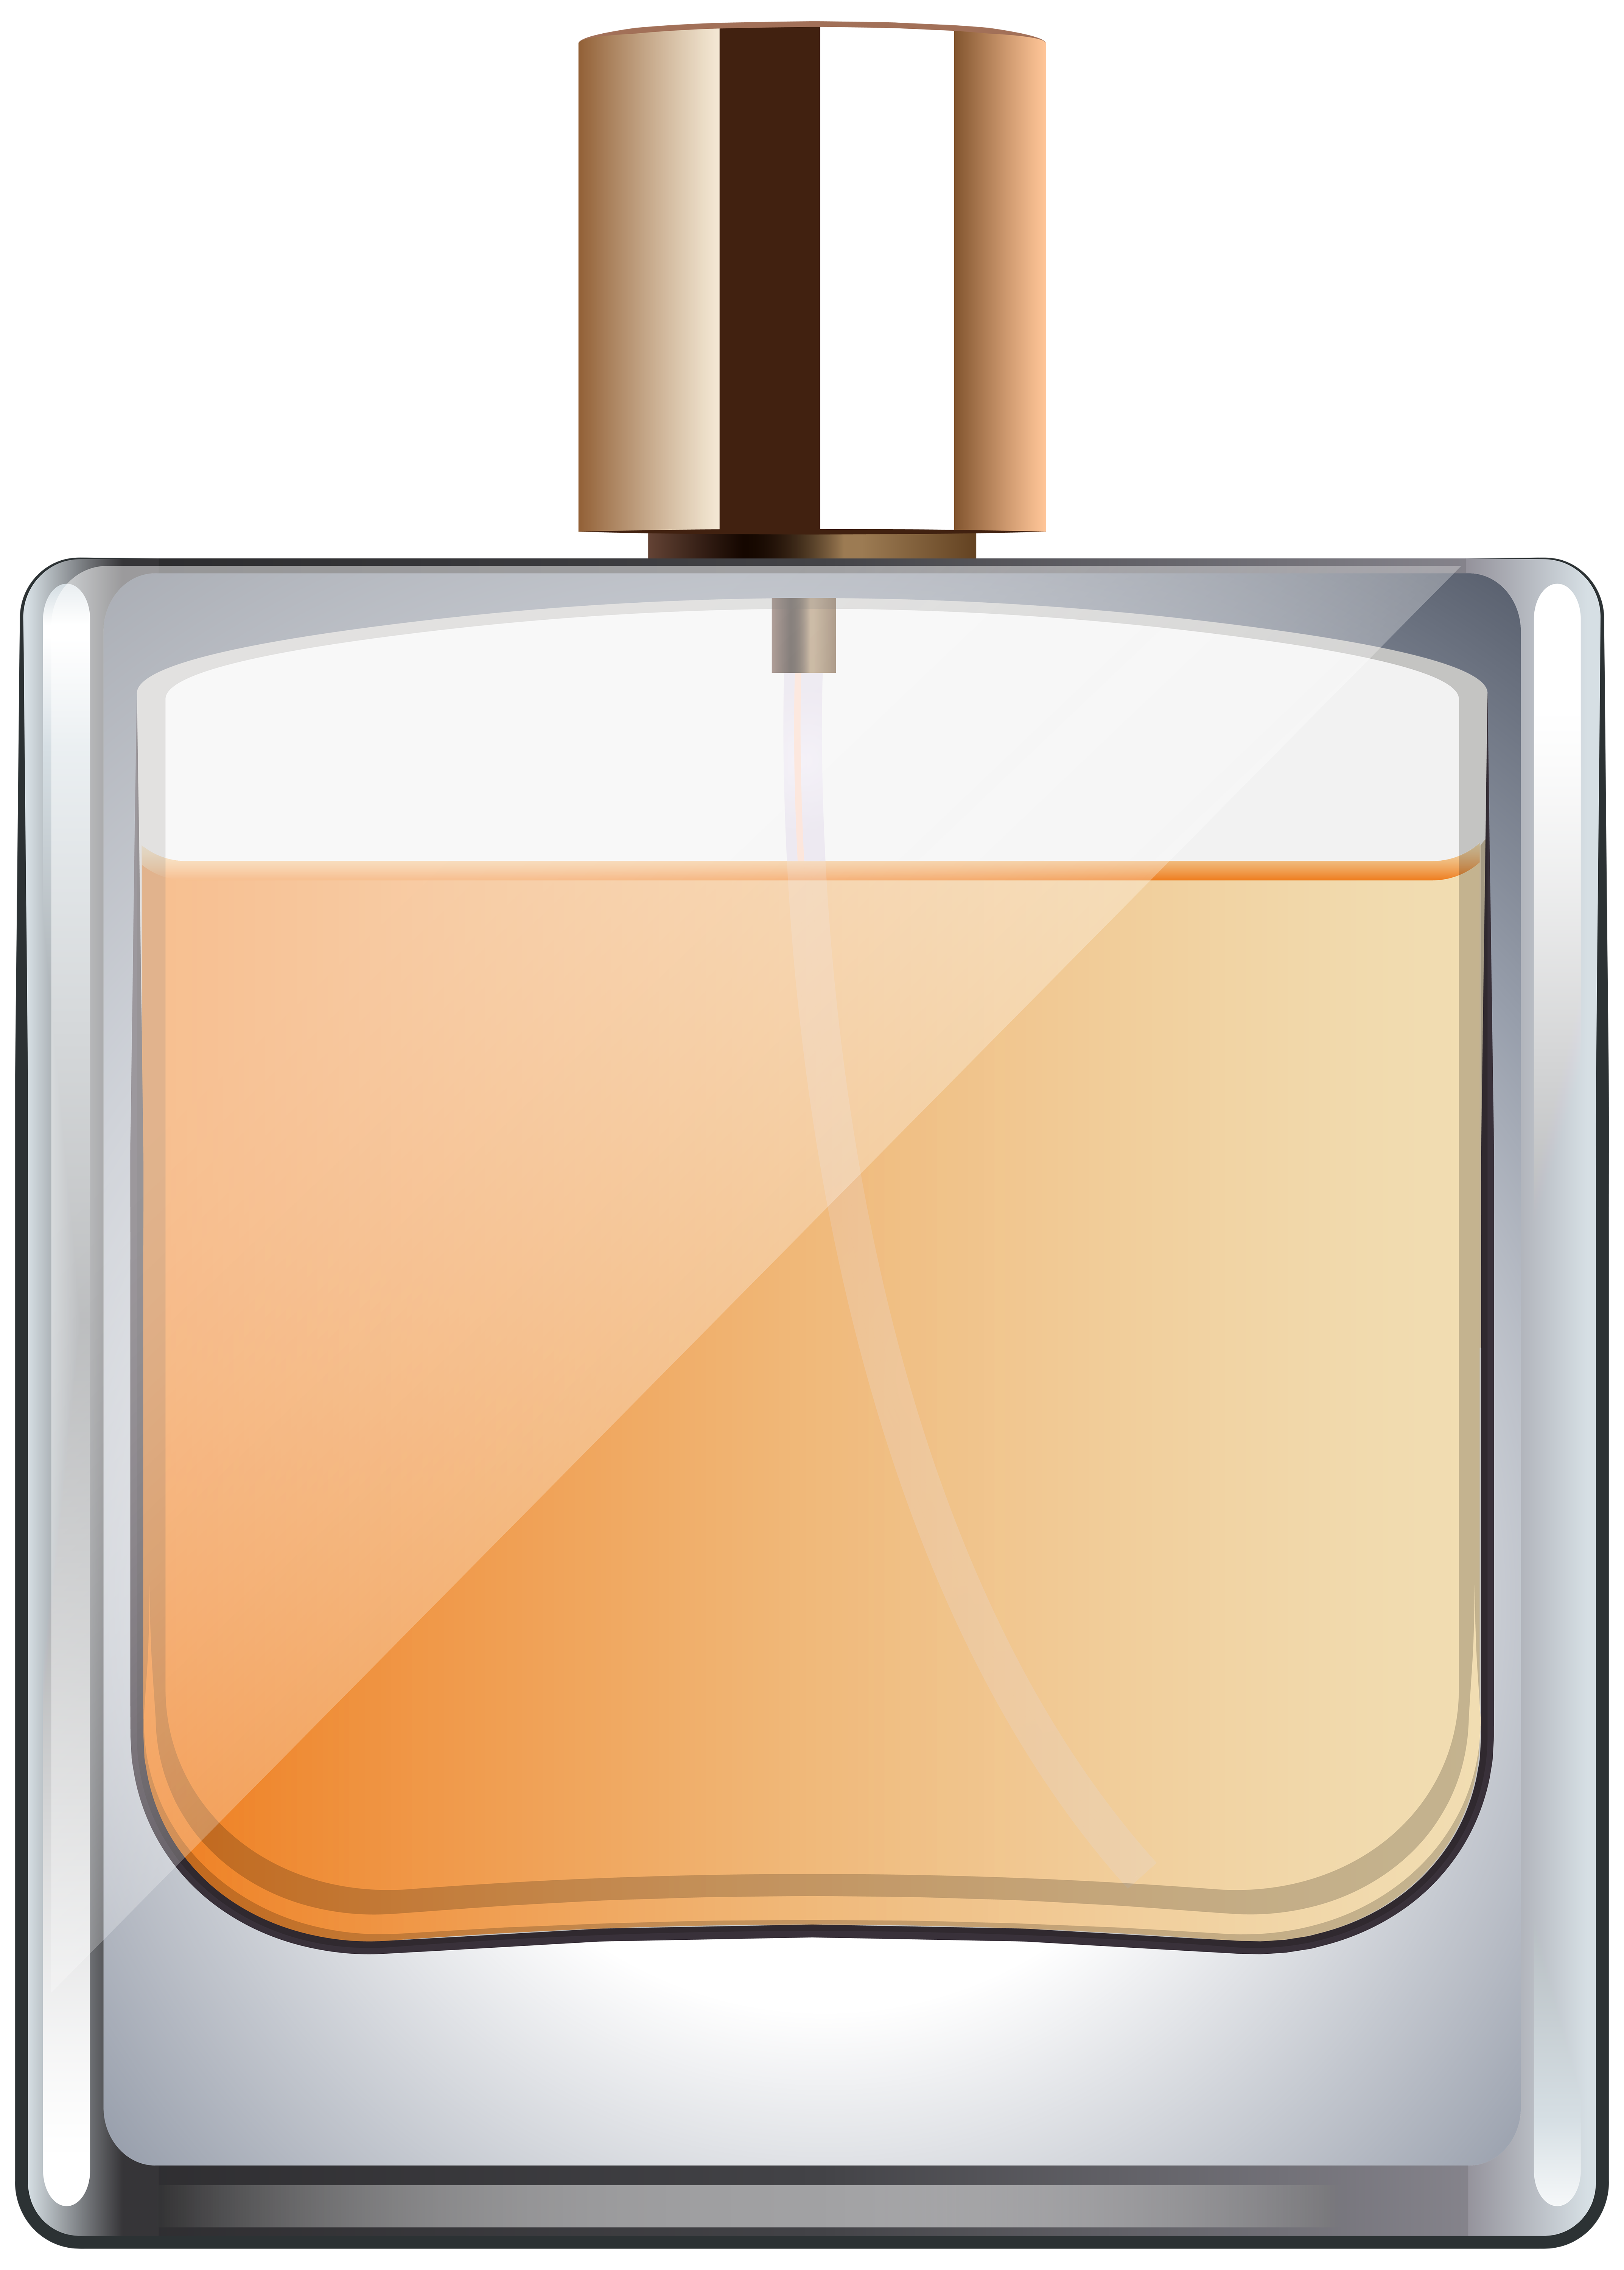 Perfume Bottle Transparent Clip Art Image Gallery Yopriceville High Quality Images And Transparent Png Free Clipart